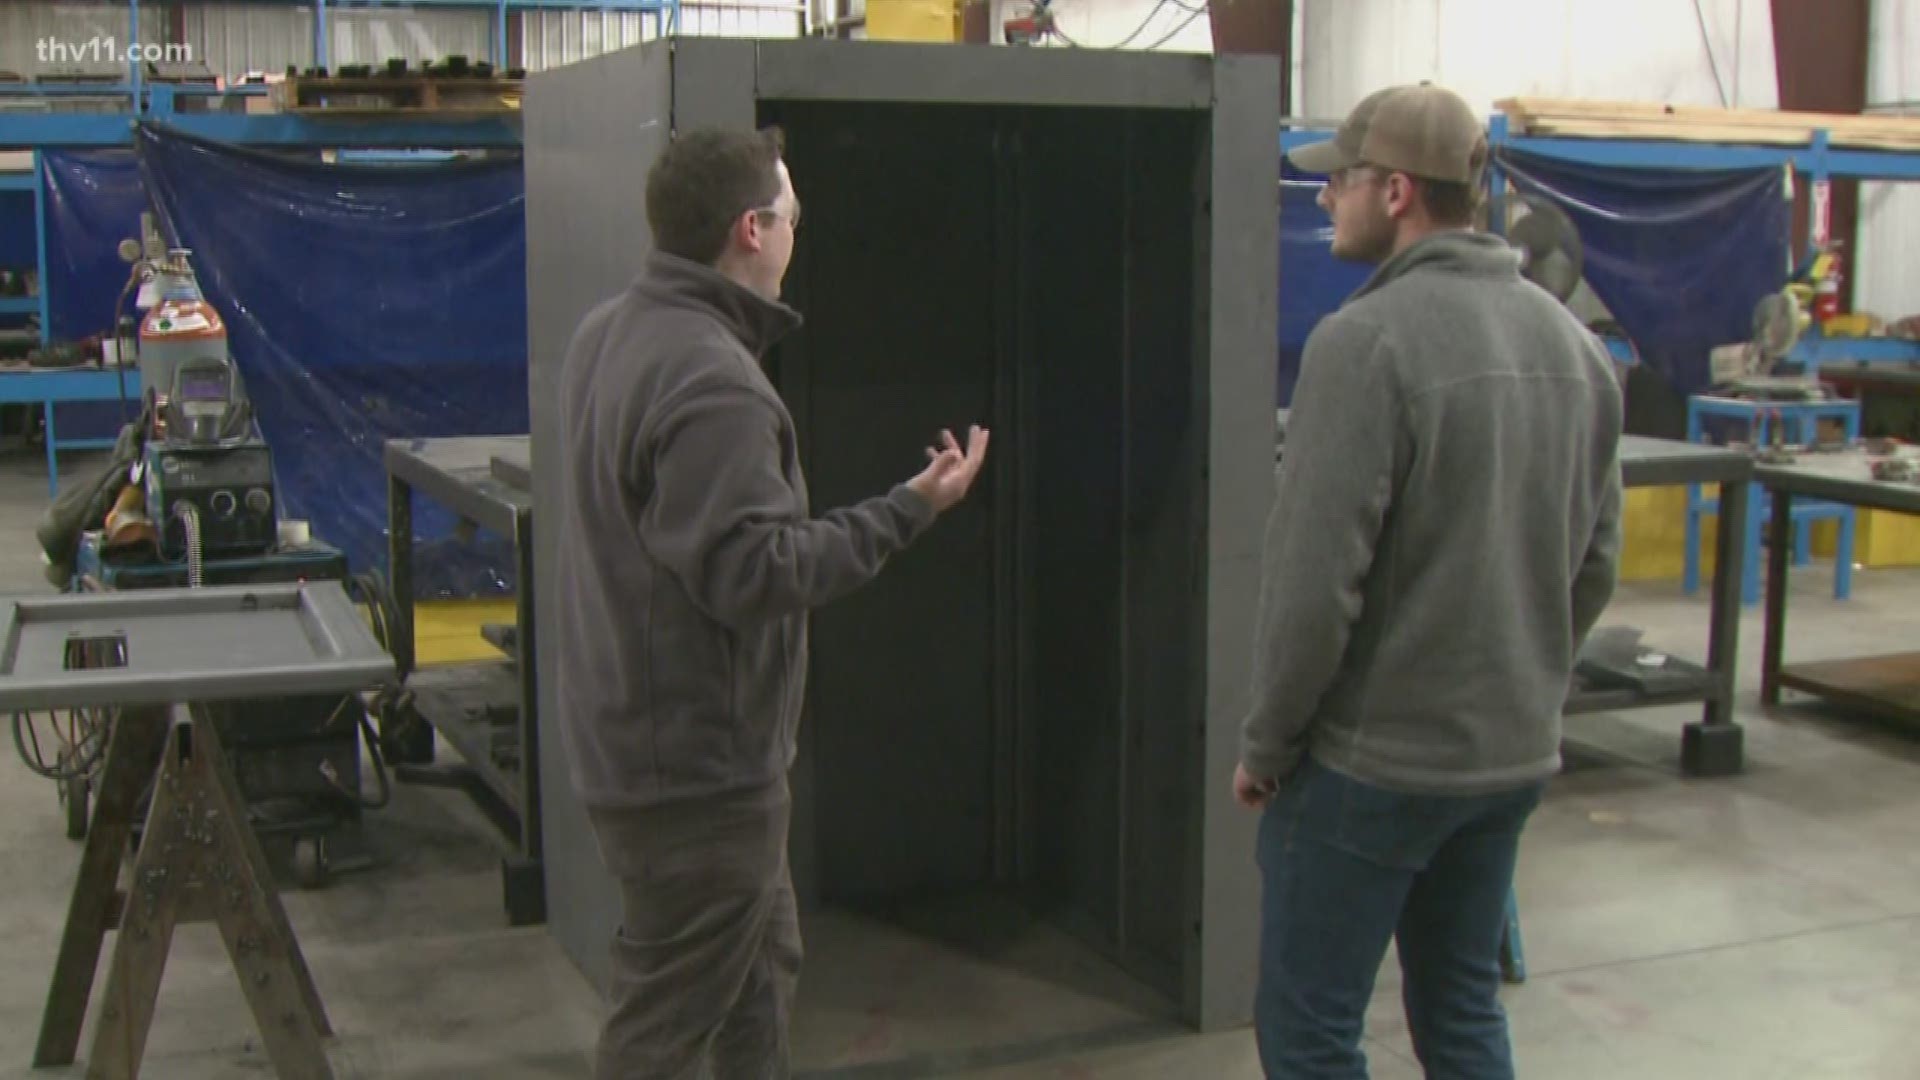 In Conway, storm shelters are being made to keep people safe from any severe weather that may arise.